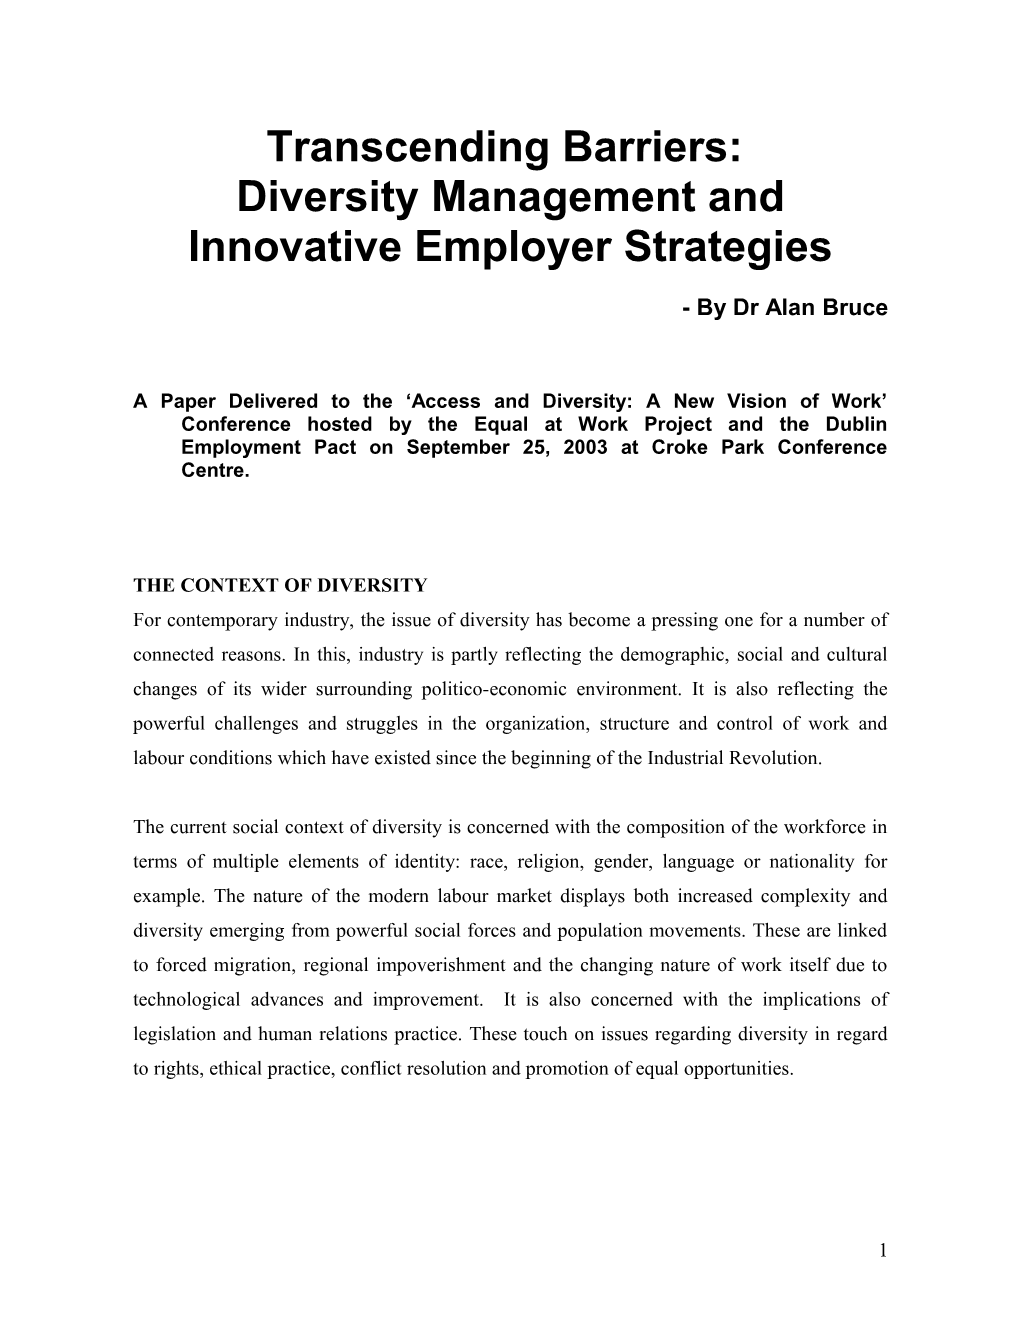 Transcending Barriers: Diversity Management and Innovative Employer Strategies